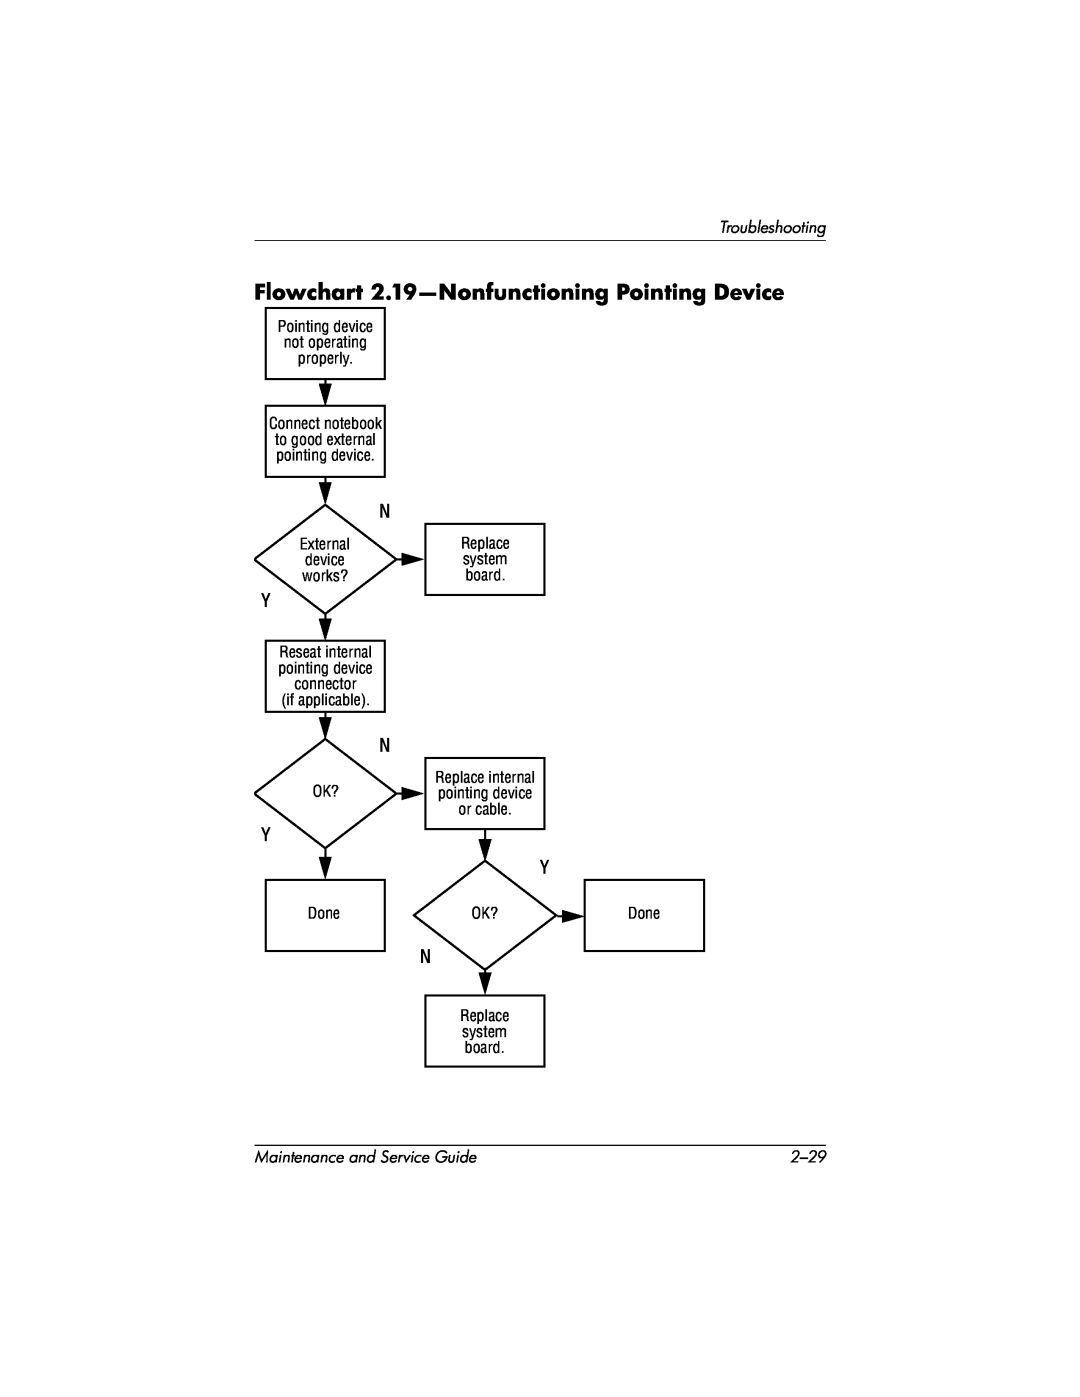 HP nx7000 Flowchart 2.19-Nonfunctioning Pointing Device, Troubleshooting, Maintenance and Service Guide, 2-29, or cable 